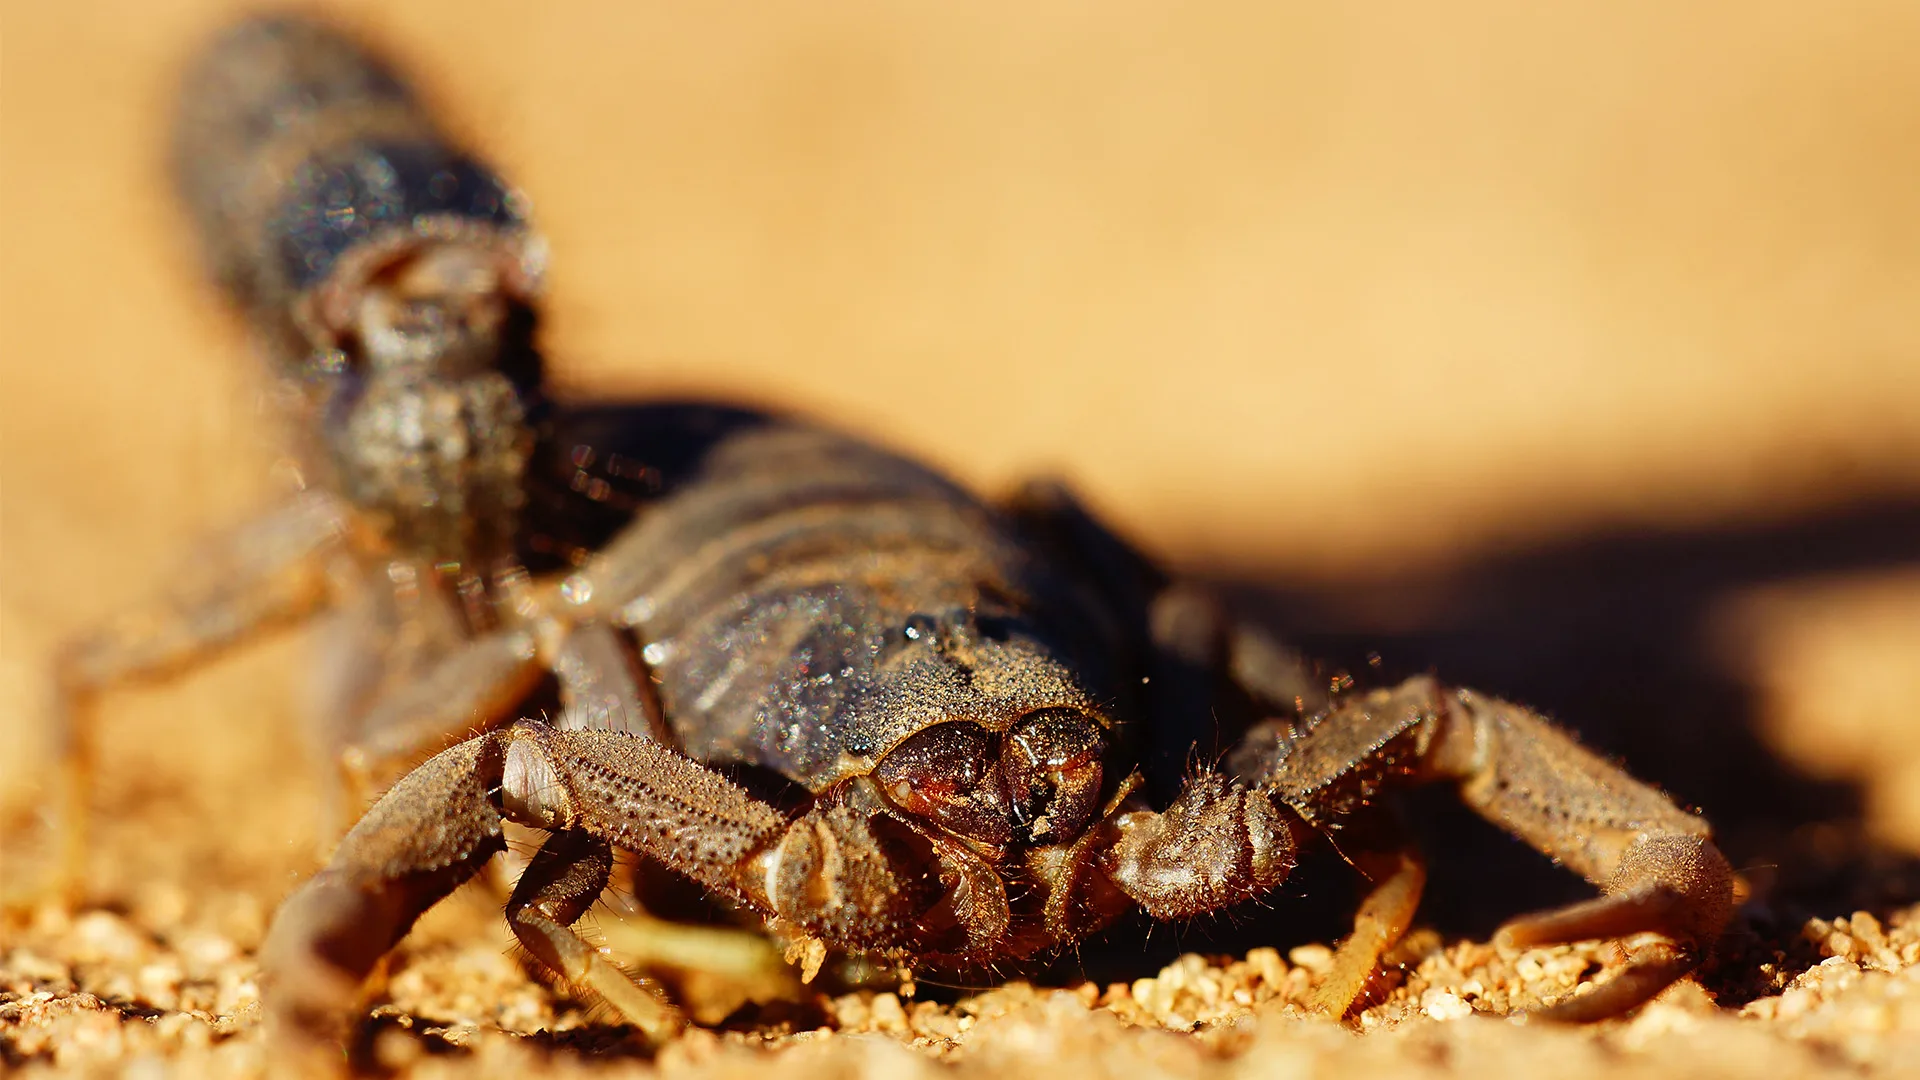 A close up of a scorpion on sand